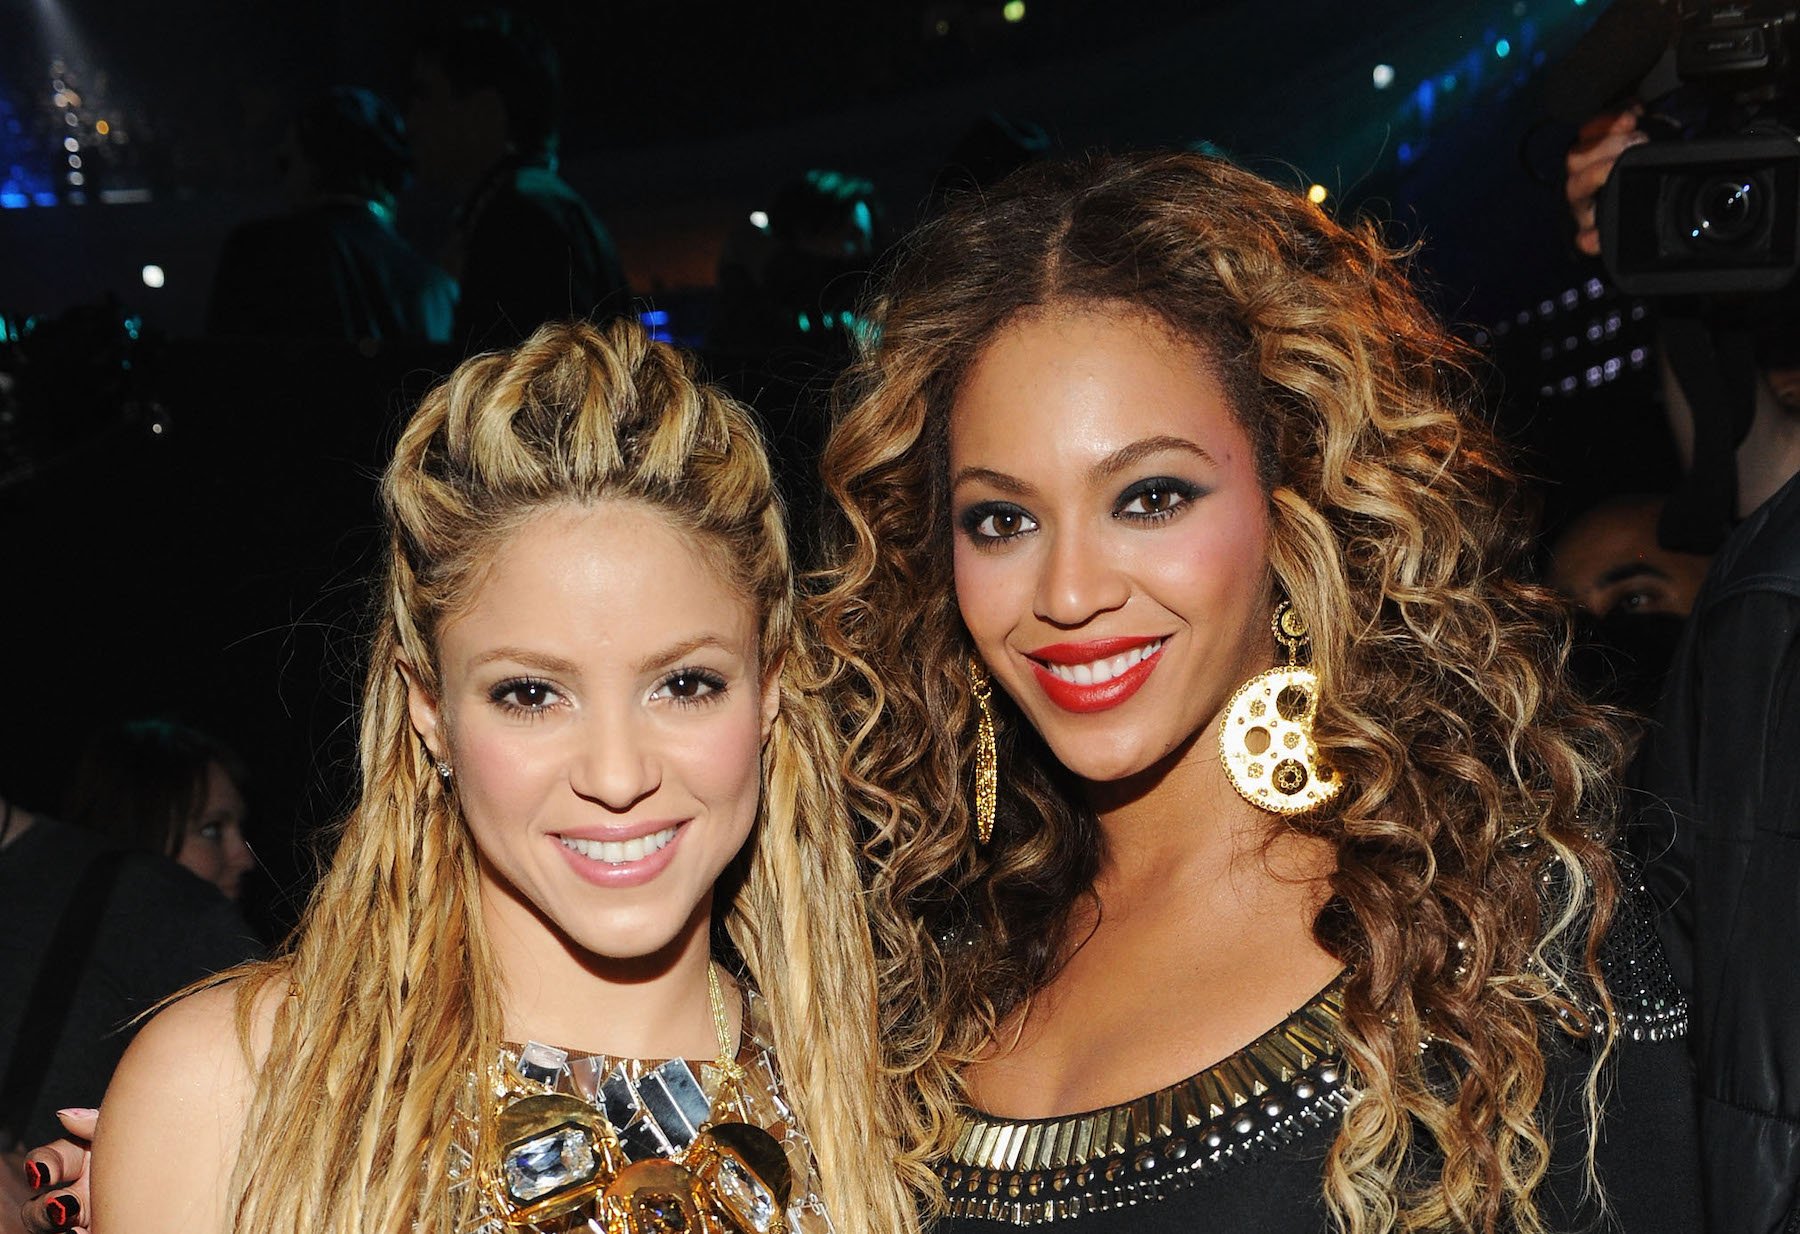 Shakira & Beyoncé, who once collaborated on the song 'Beautiful Liar', posing for a photo together